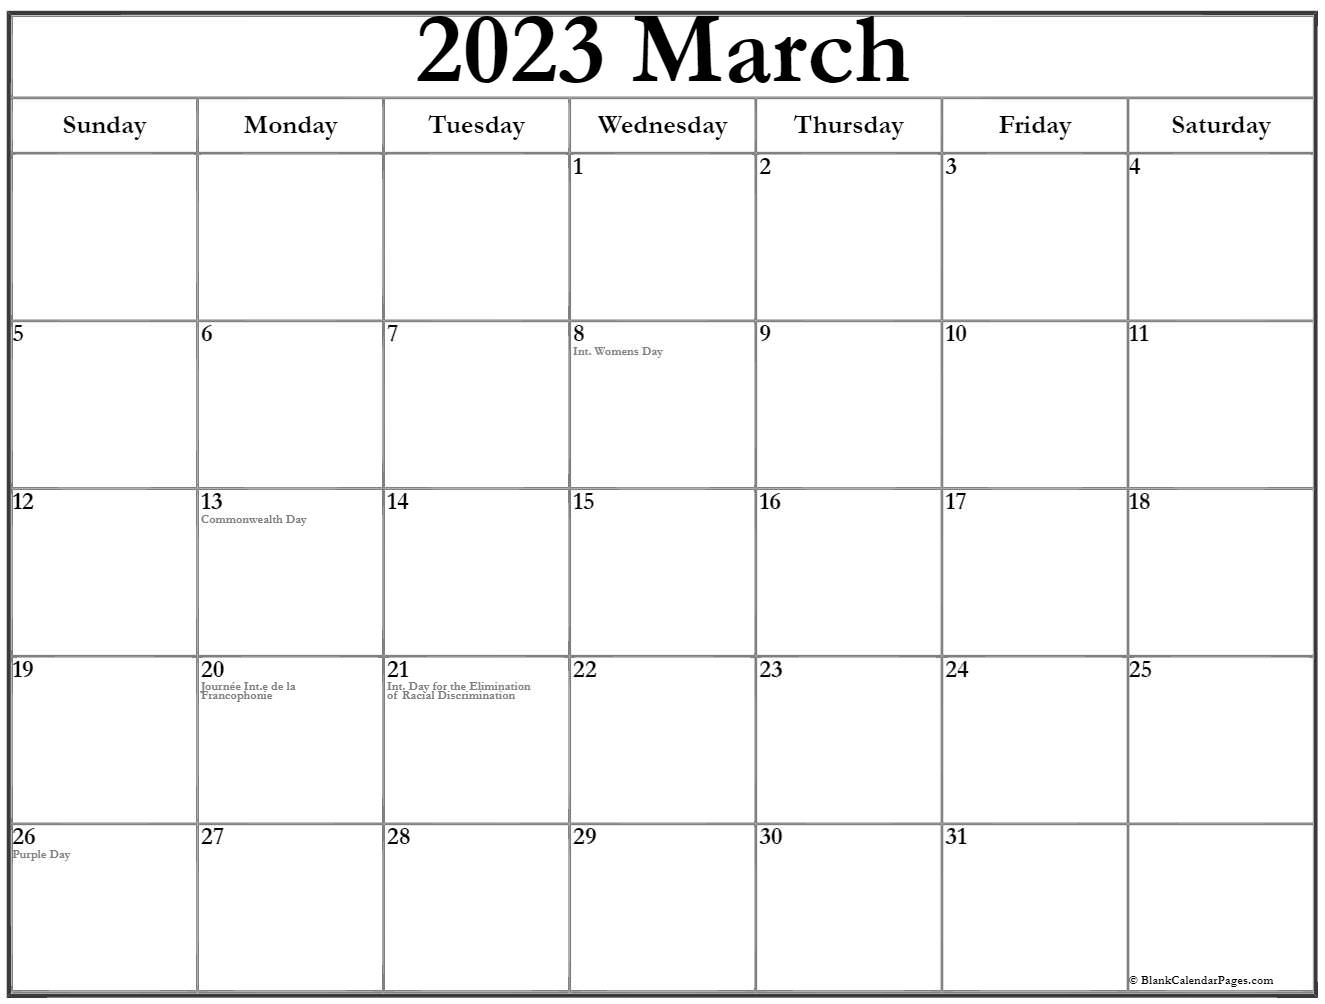 March 2023 Calendar With Holidays intended for March 2023 Calendar Printable